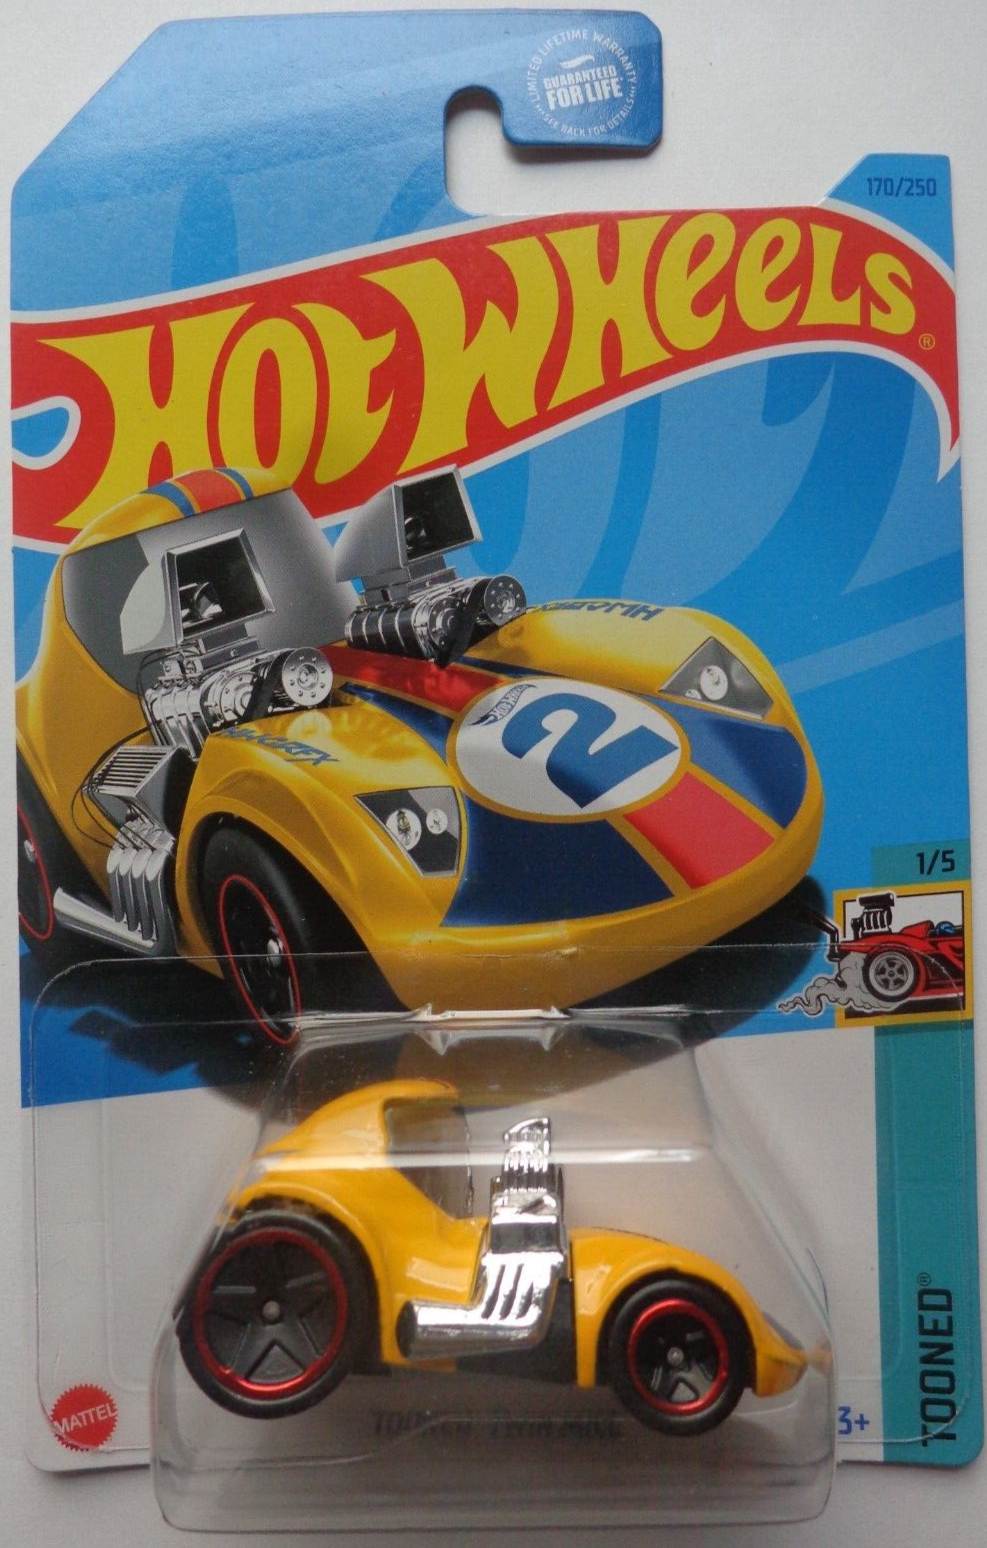 Hot Wheels Twin Mill Tooned 1/5, 170/250 Yellow